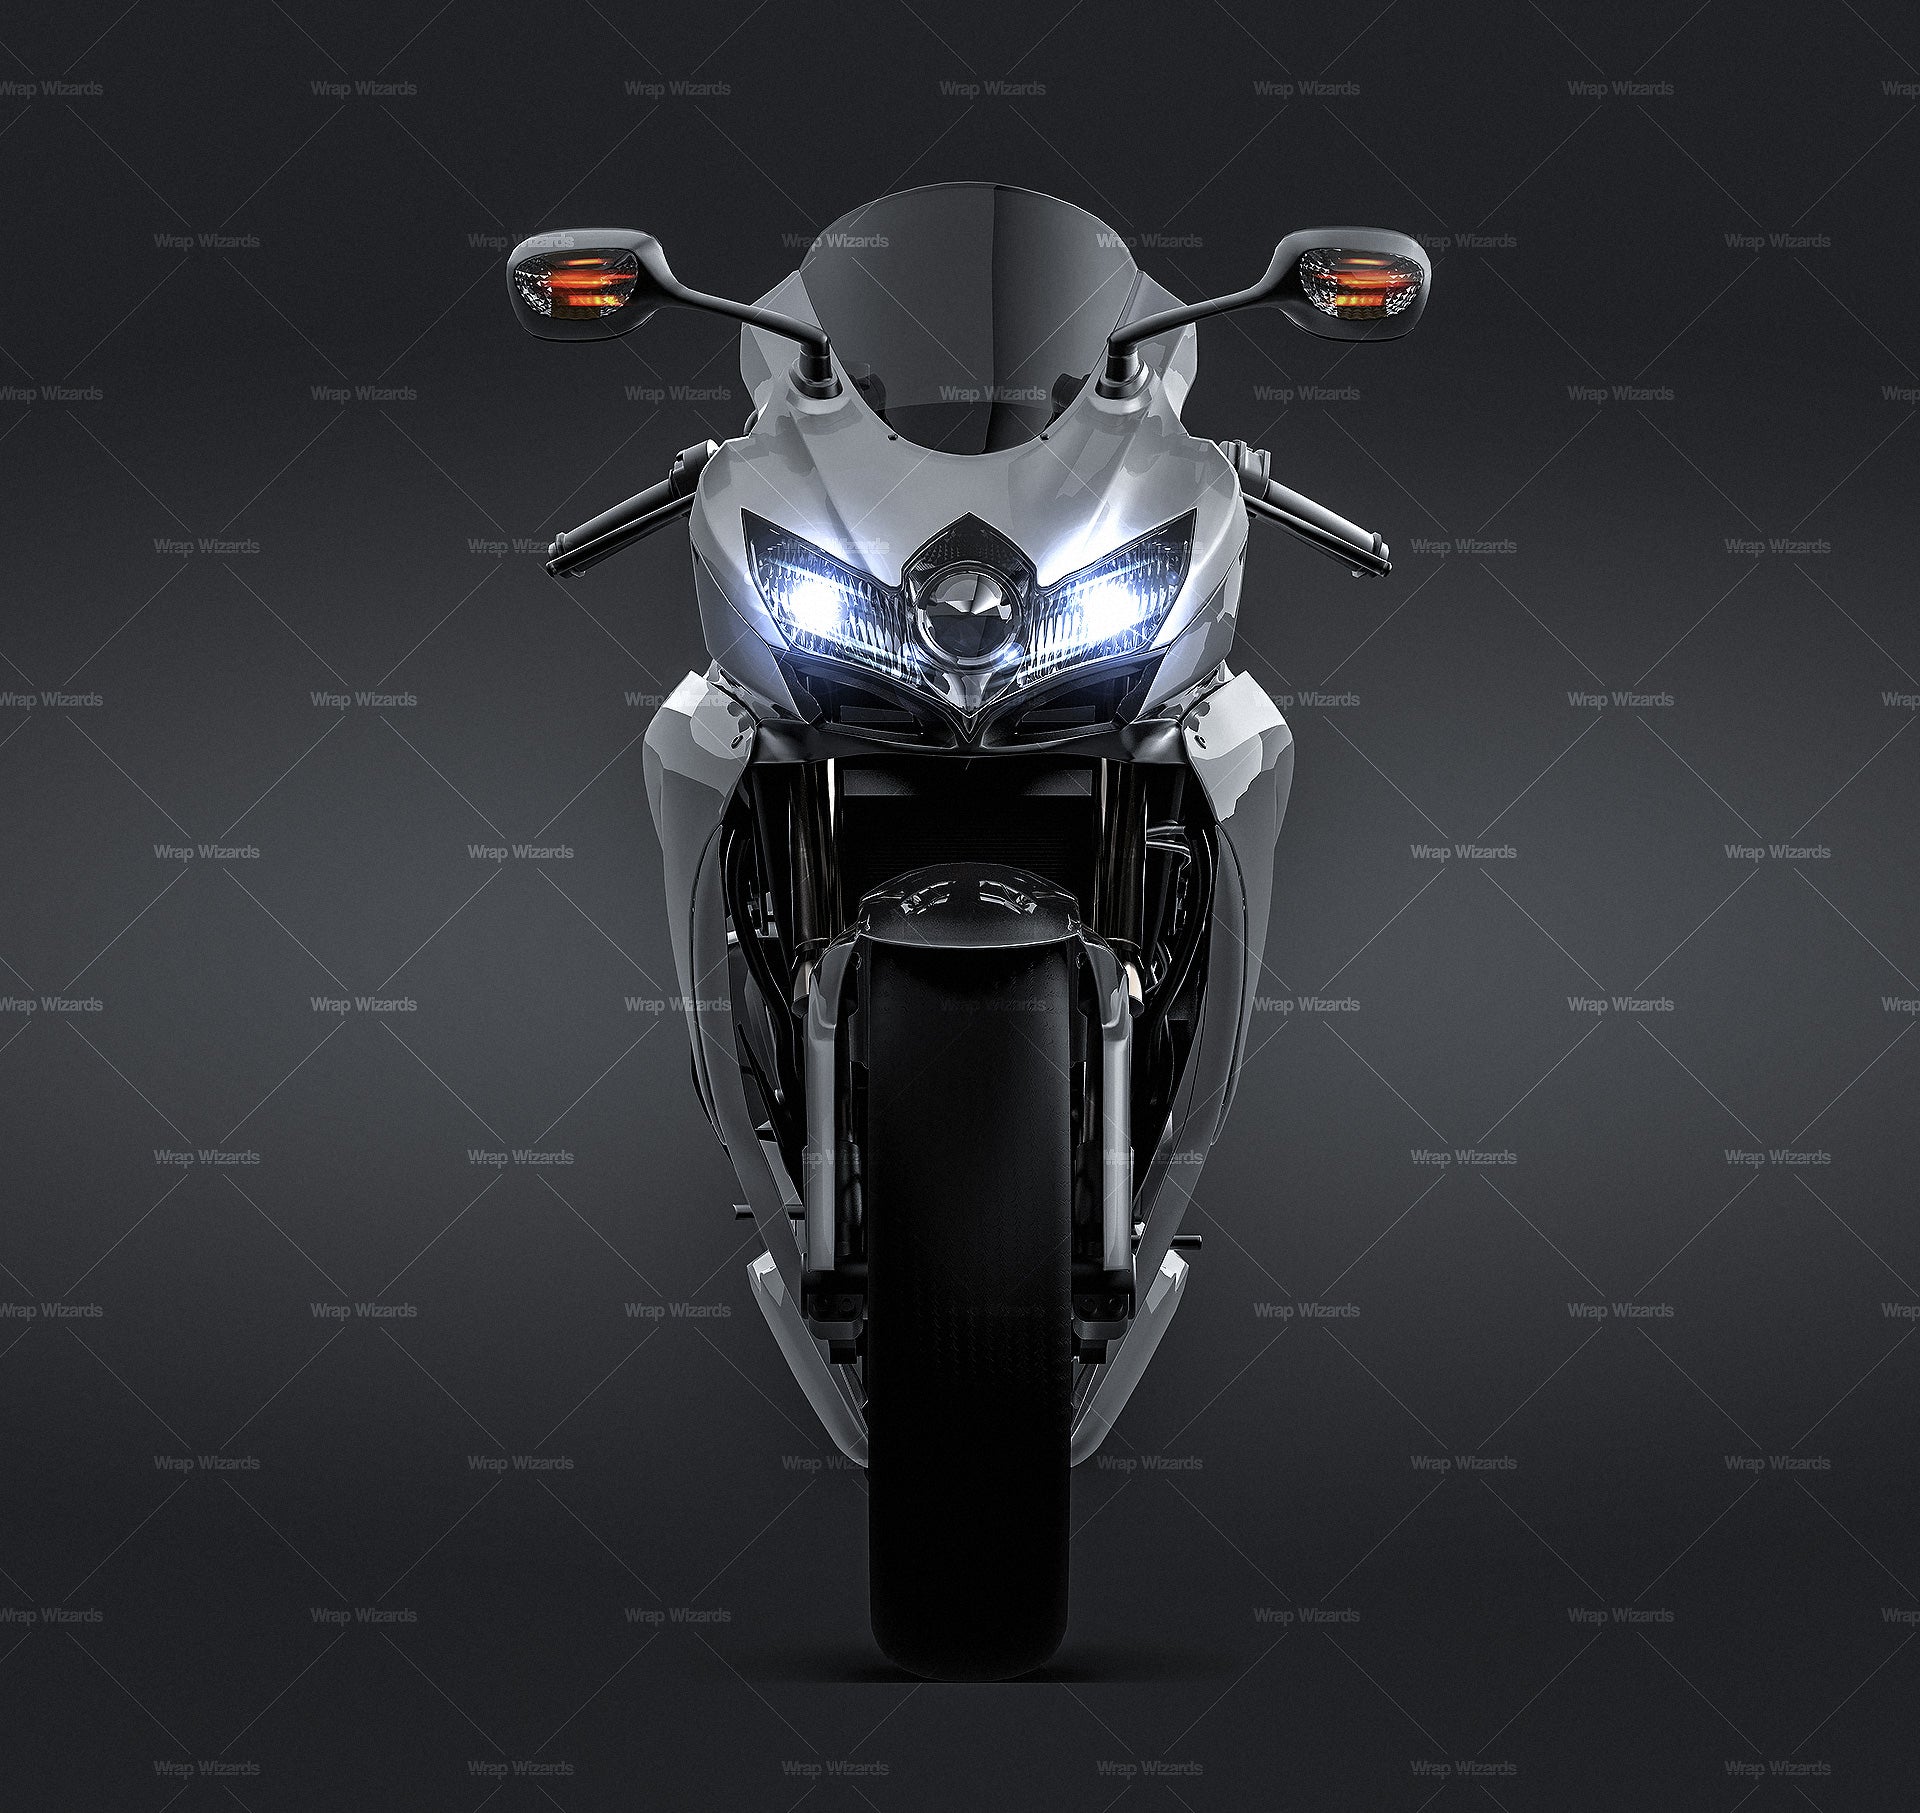 Suzuki GSX-R 600 2007 glossy finish - all sides Motorcycle Mockup Template.psd